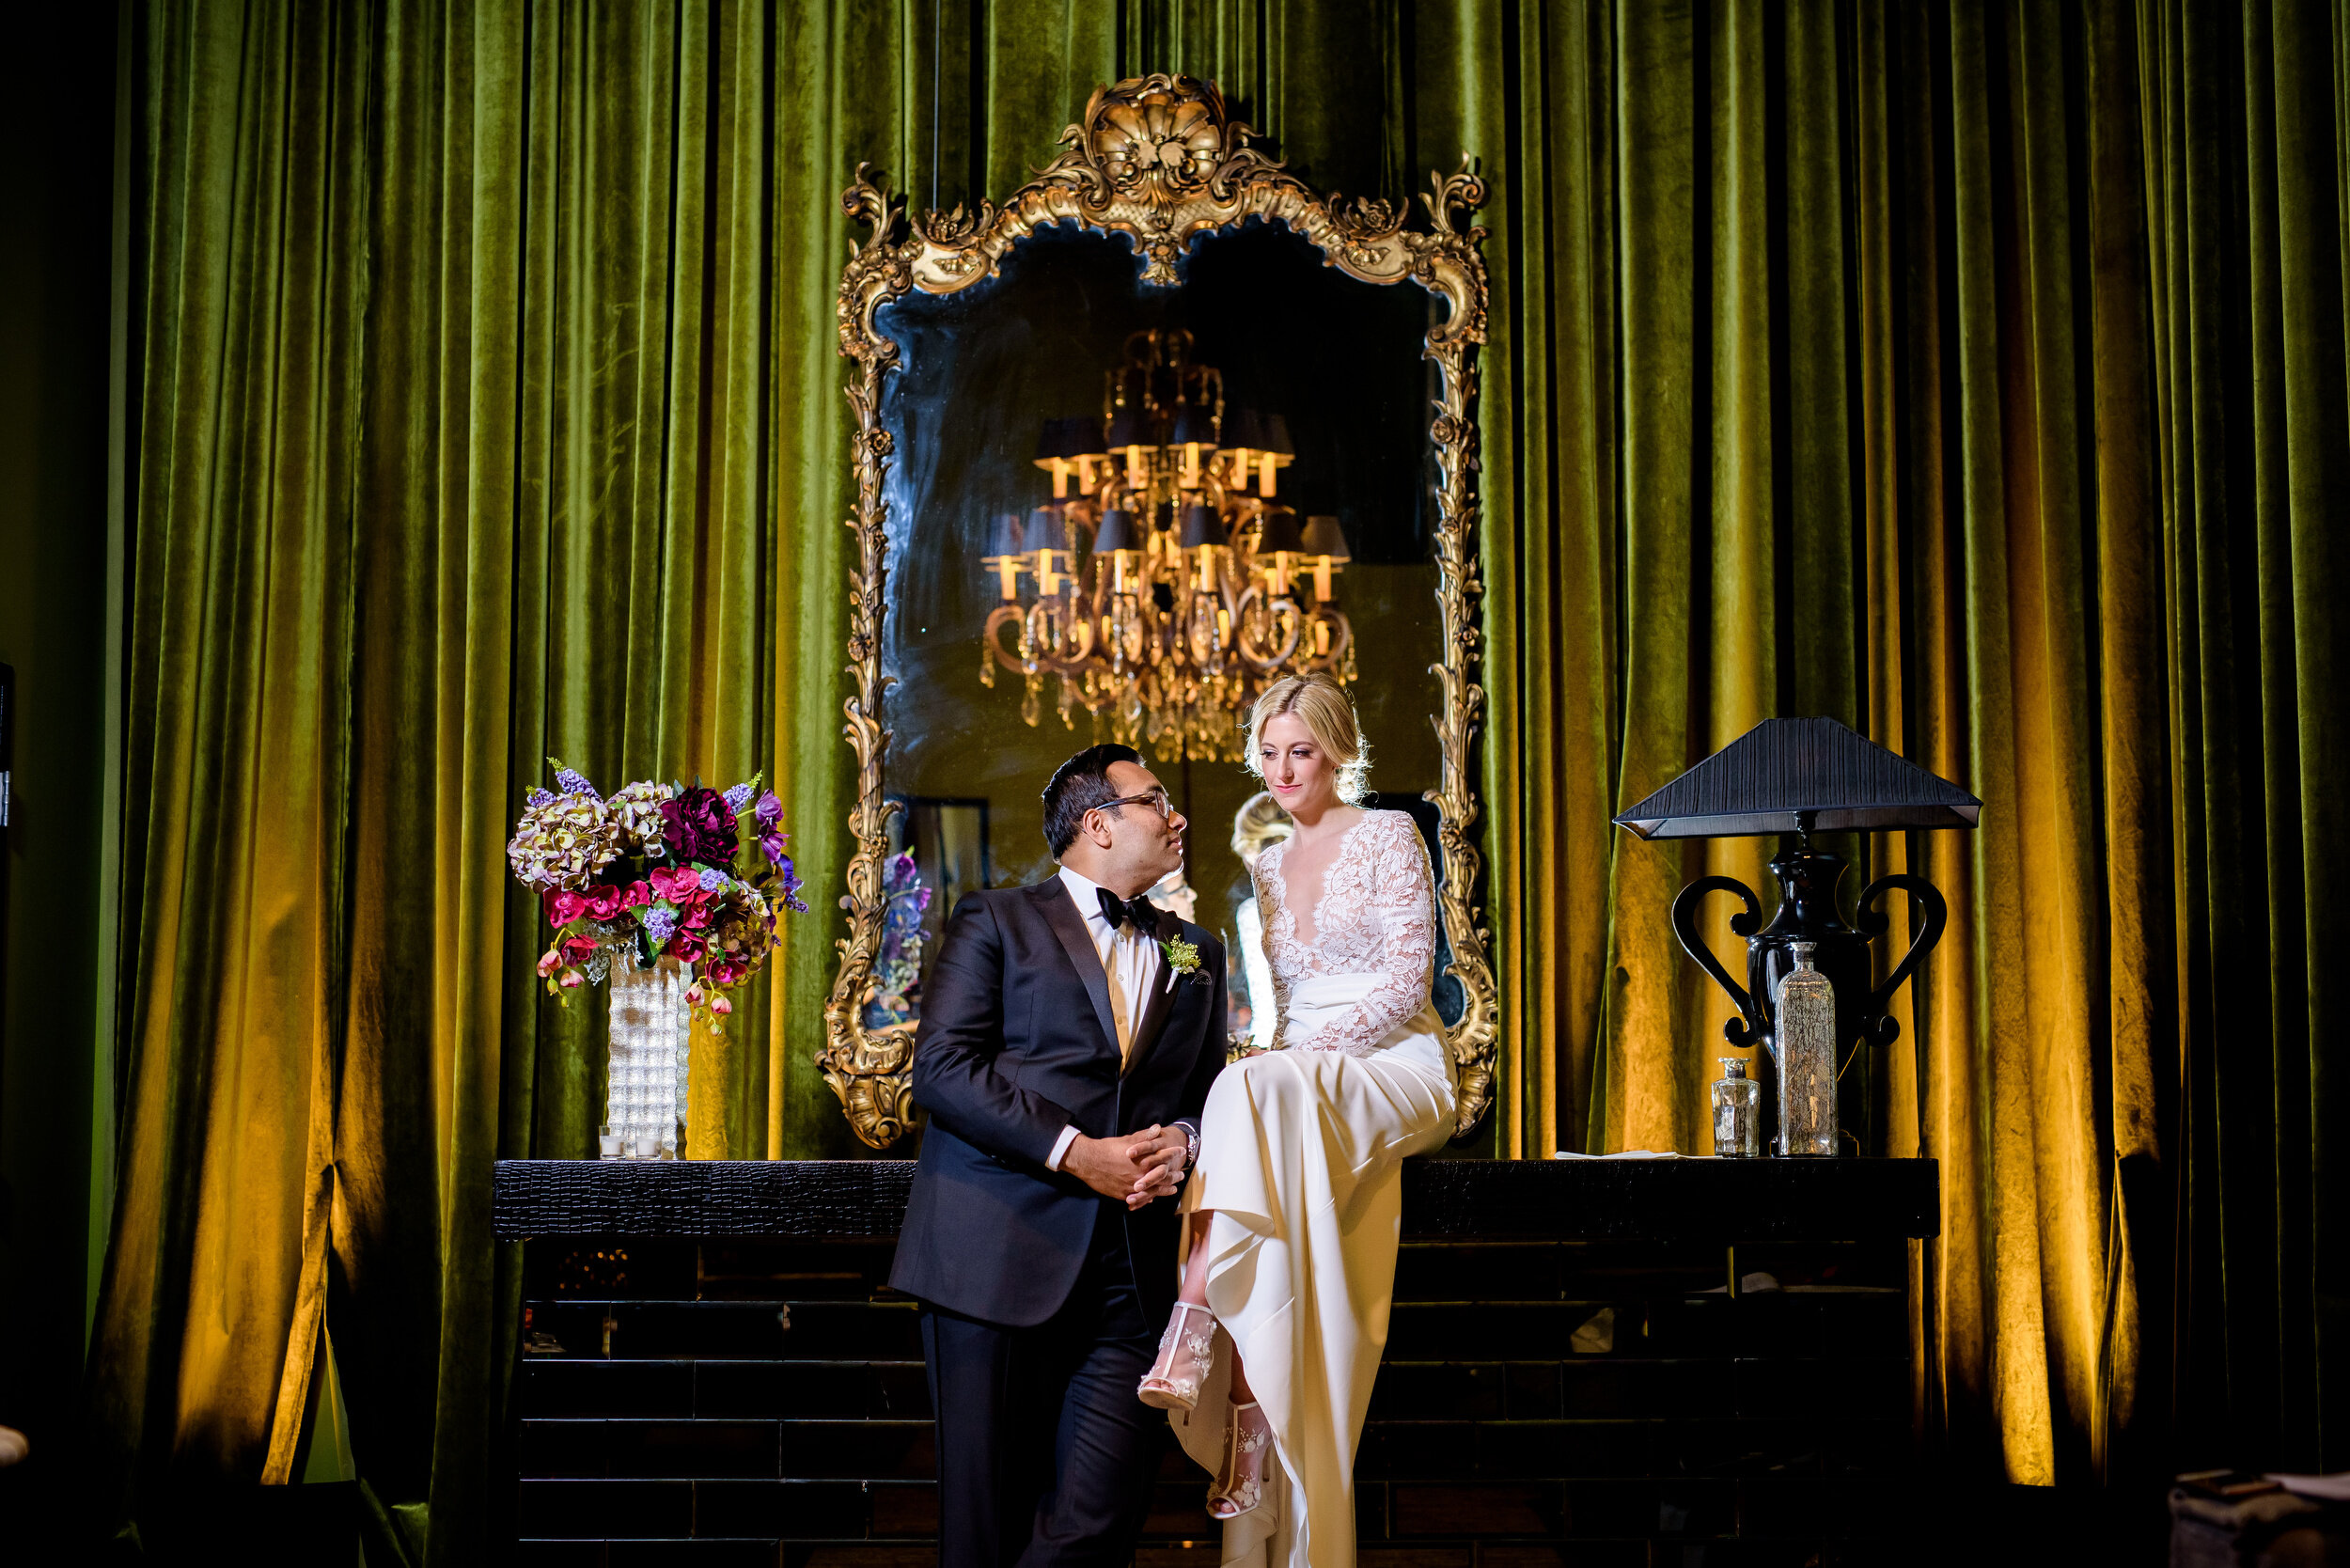 Creative moody portrait of bride and groom: Geraghty Chicago wedding photography captured by J. Brown Photography.